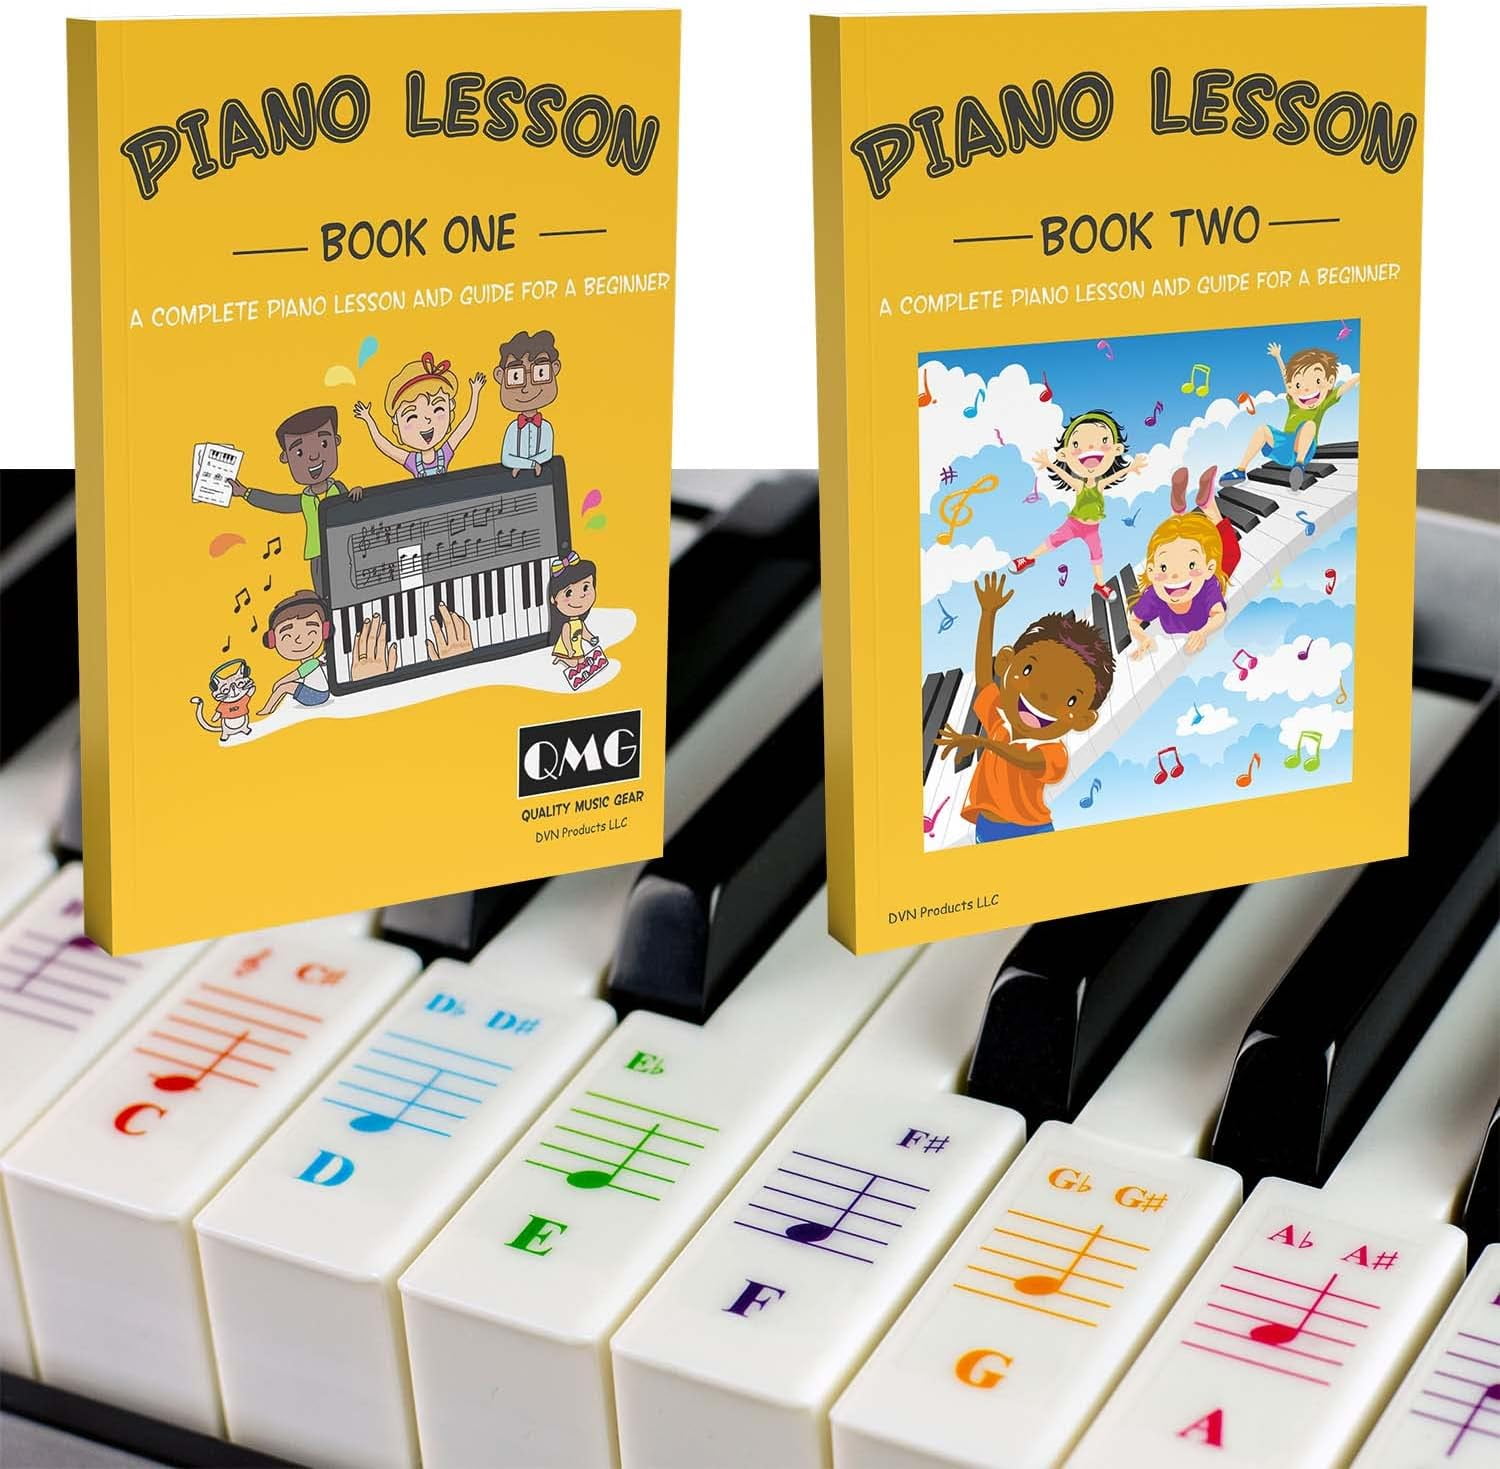  Piano Notes Guide for Beginner, Removable Piano Keyboard Note  Labels for Learning, 88-Key Full Size, Made of Silicone, No Need Stickers,  Reusable and Comes(Color) : 樂器